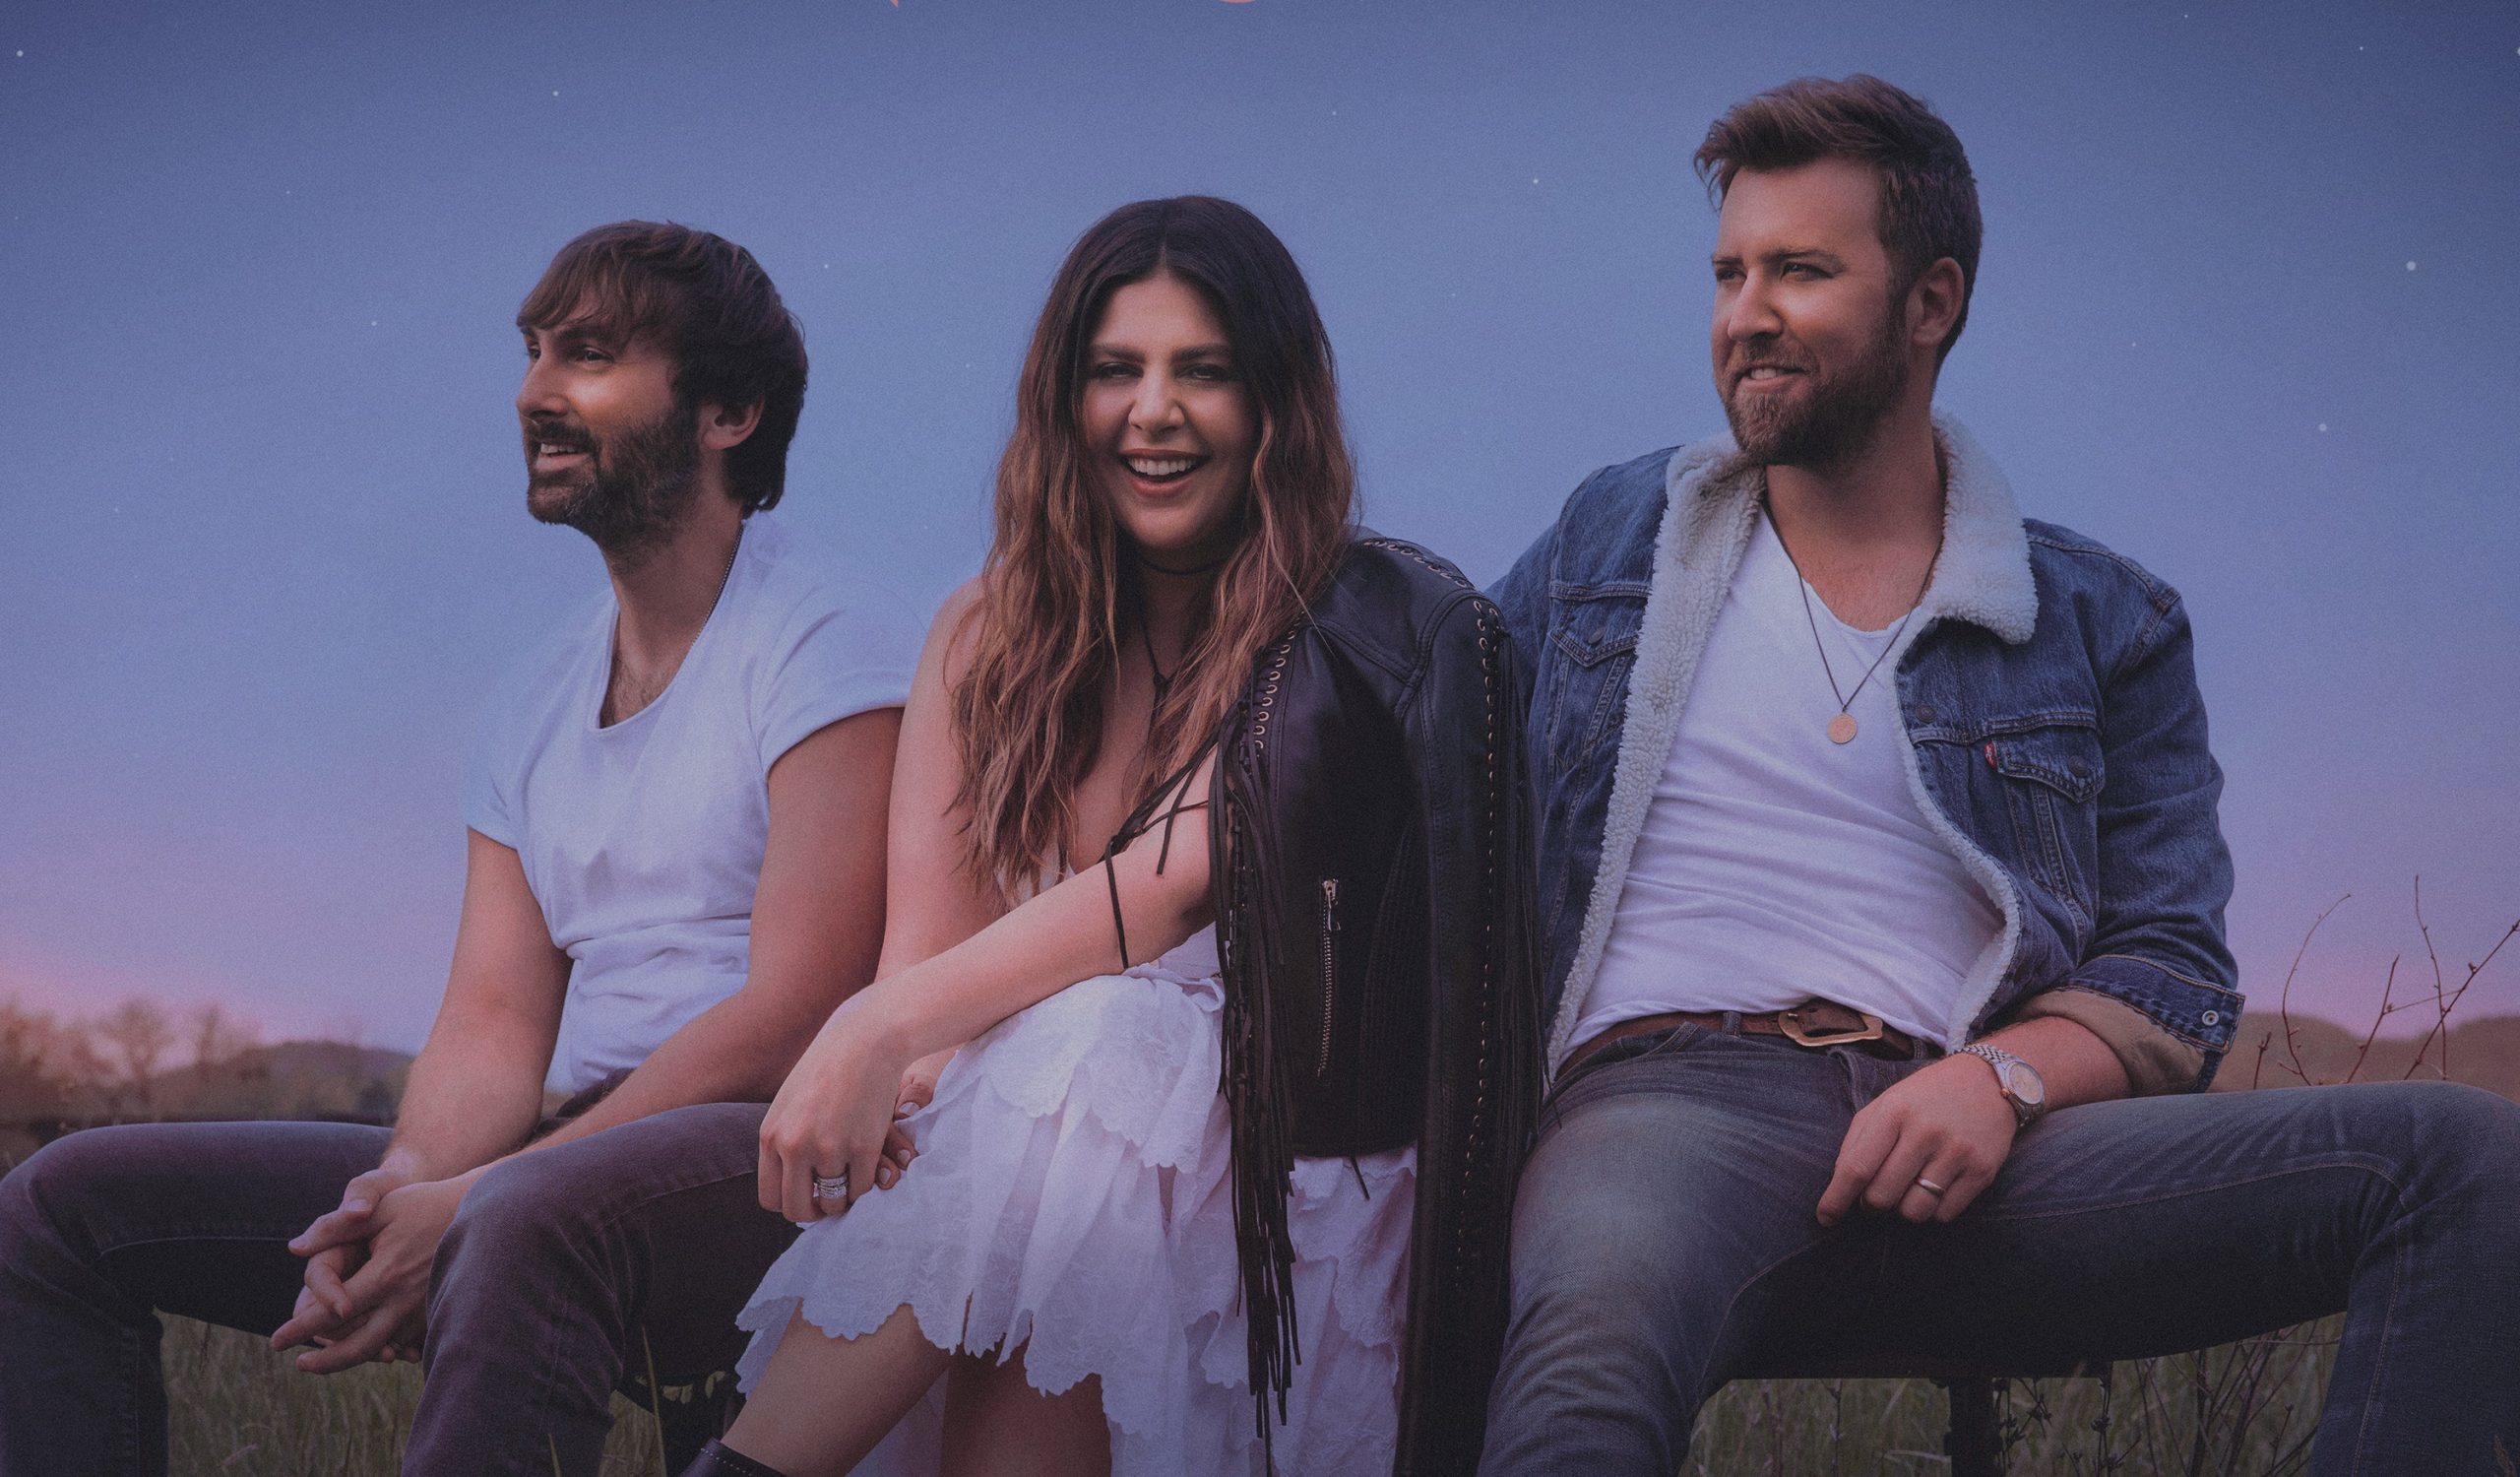 Lady Antebellum Pop Open 'Champagne Night' as New Single Sounds Like